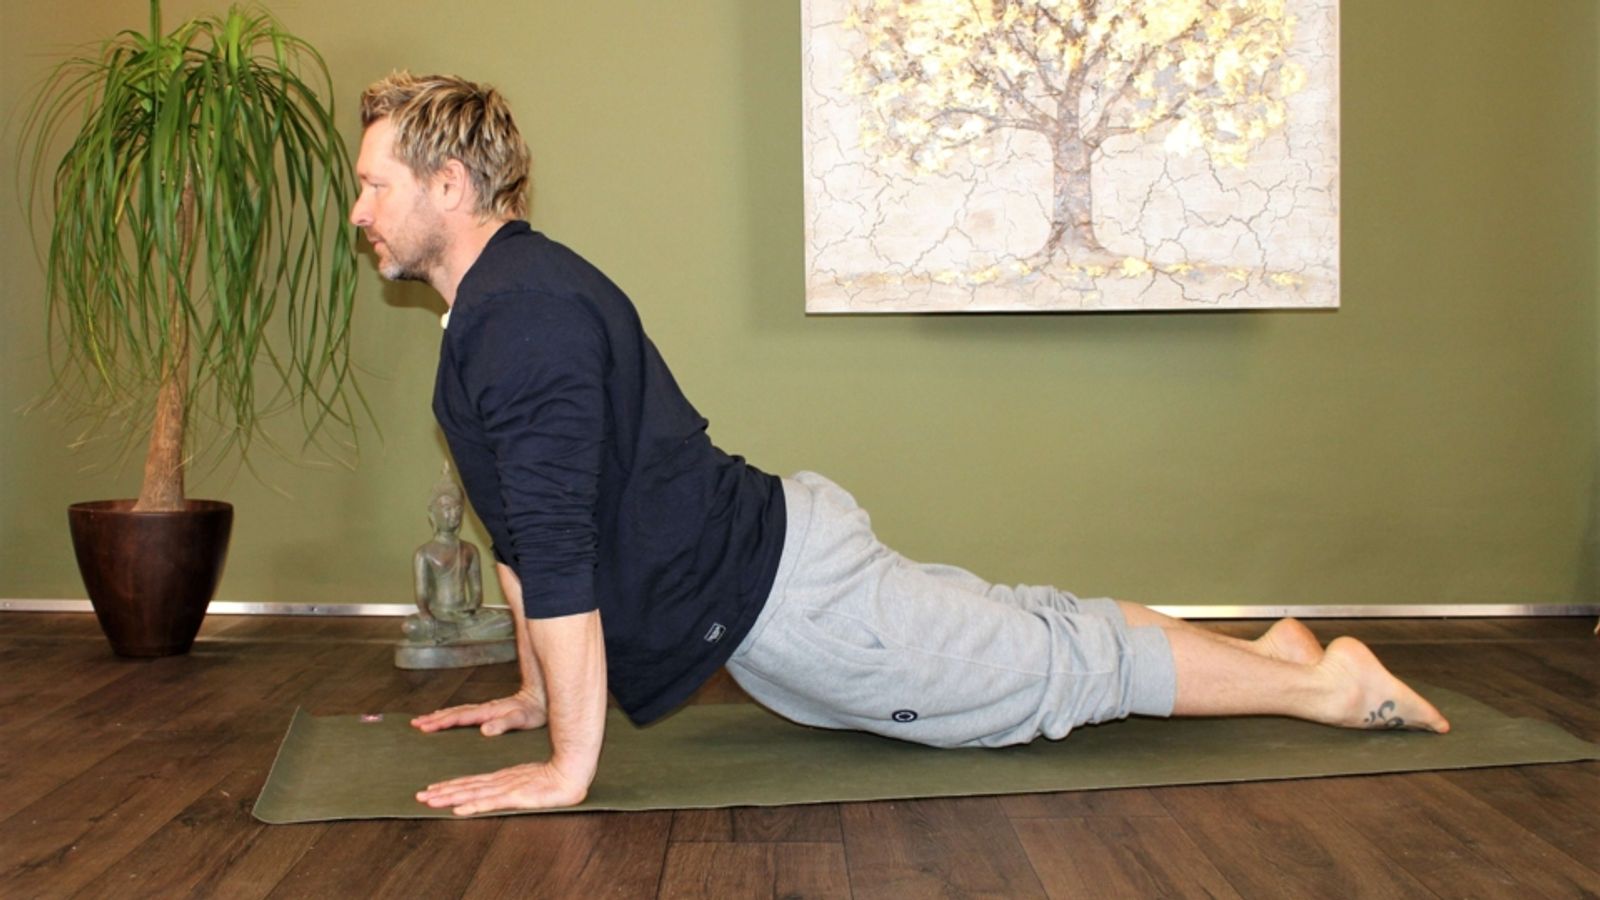 Transitions and alignments - From plank position to upward facing dog